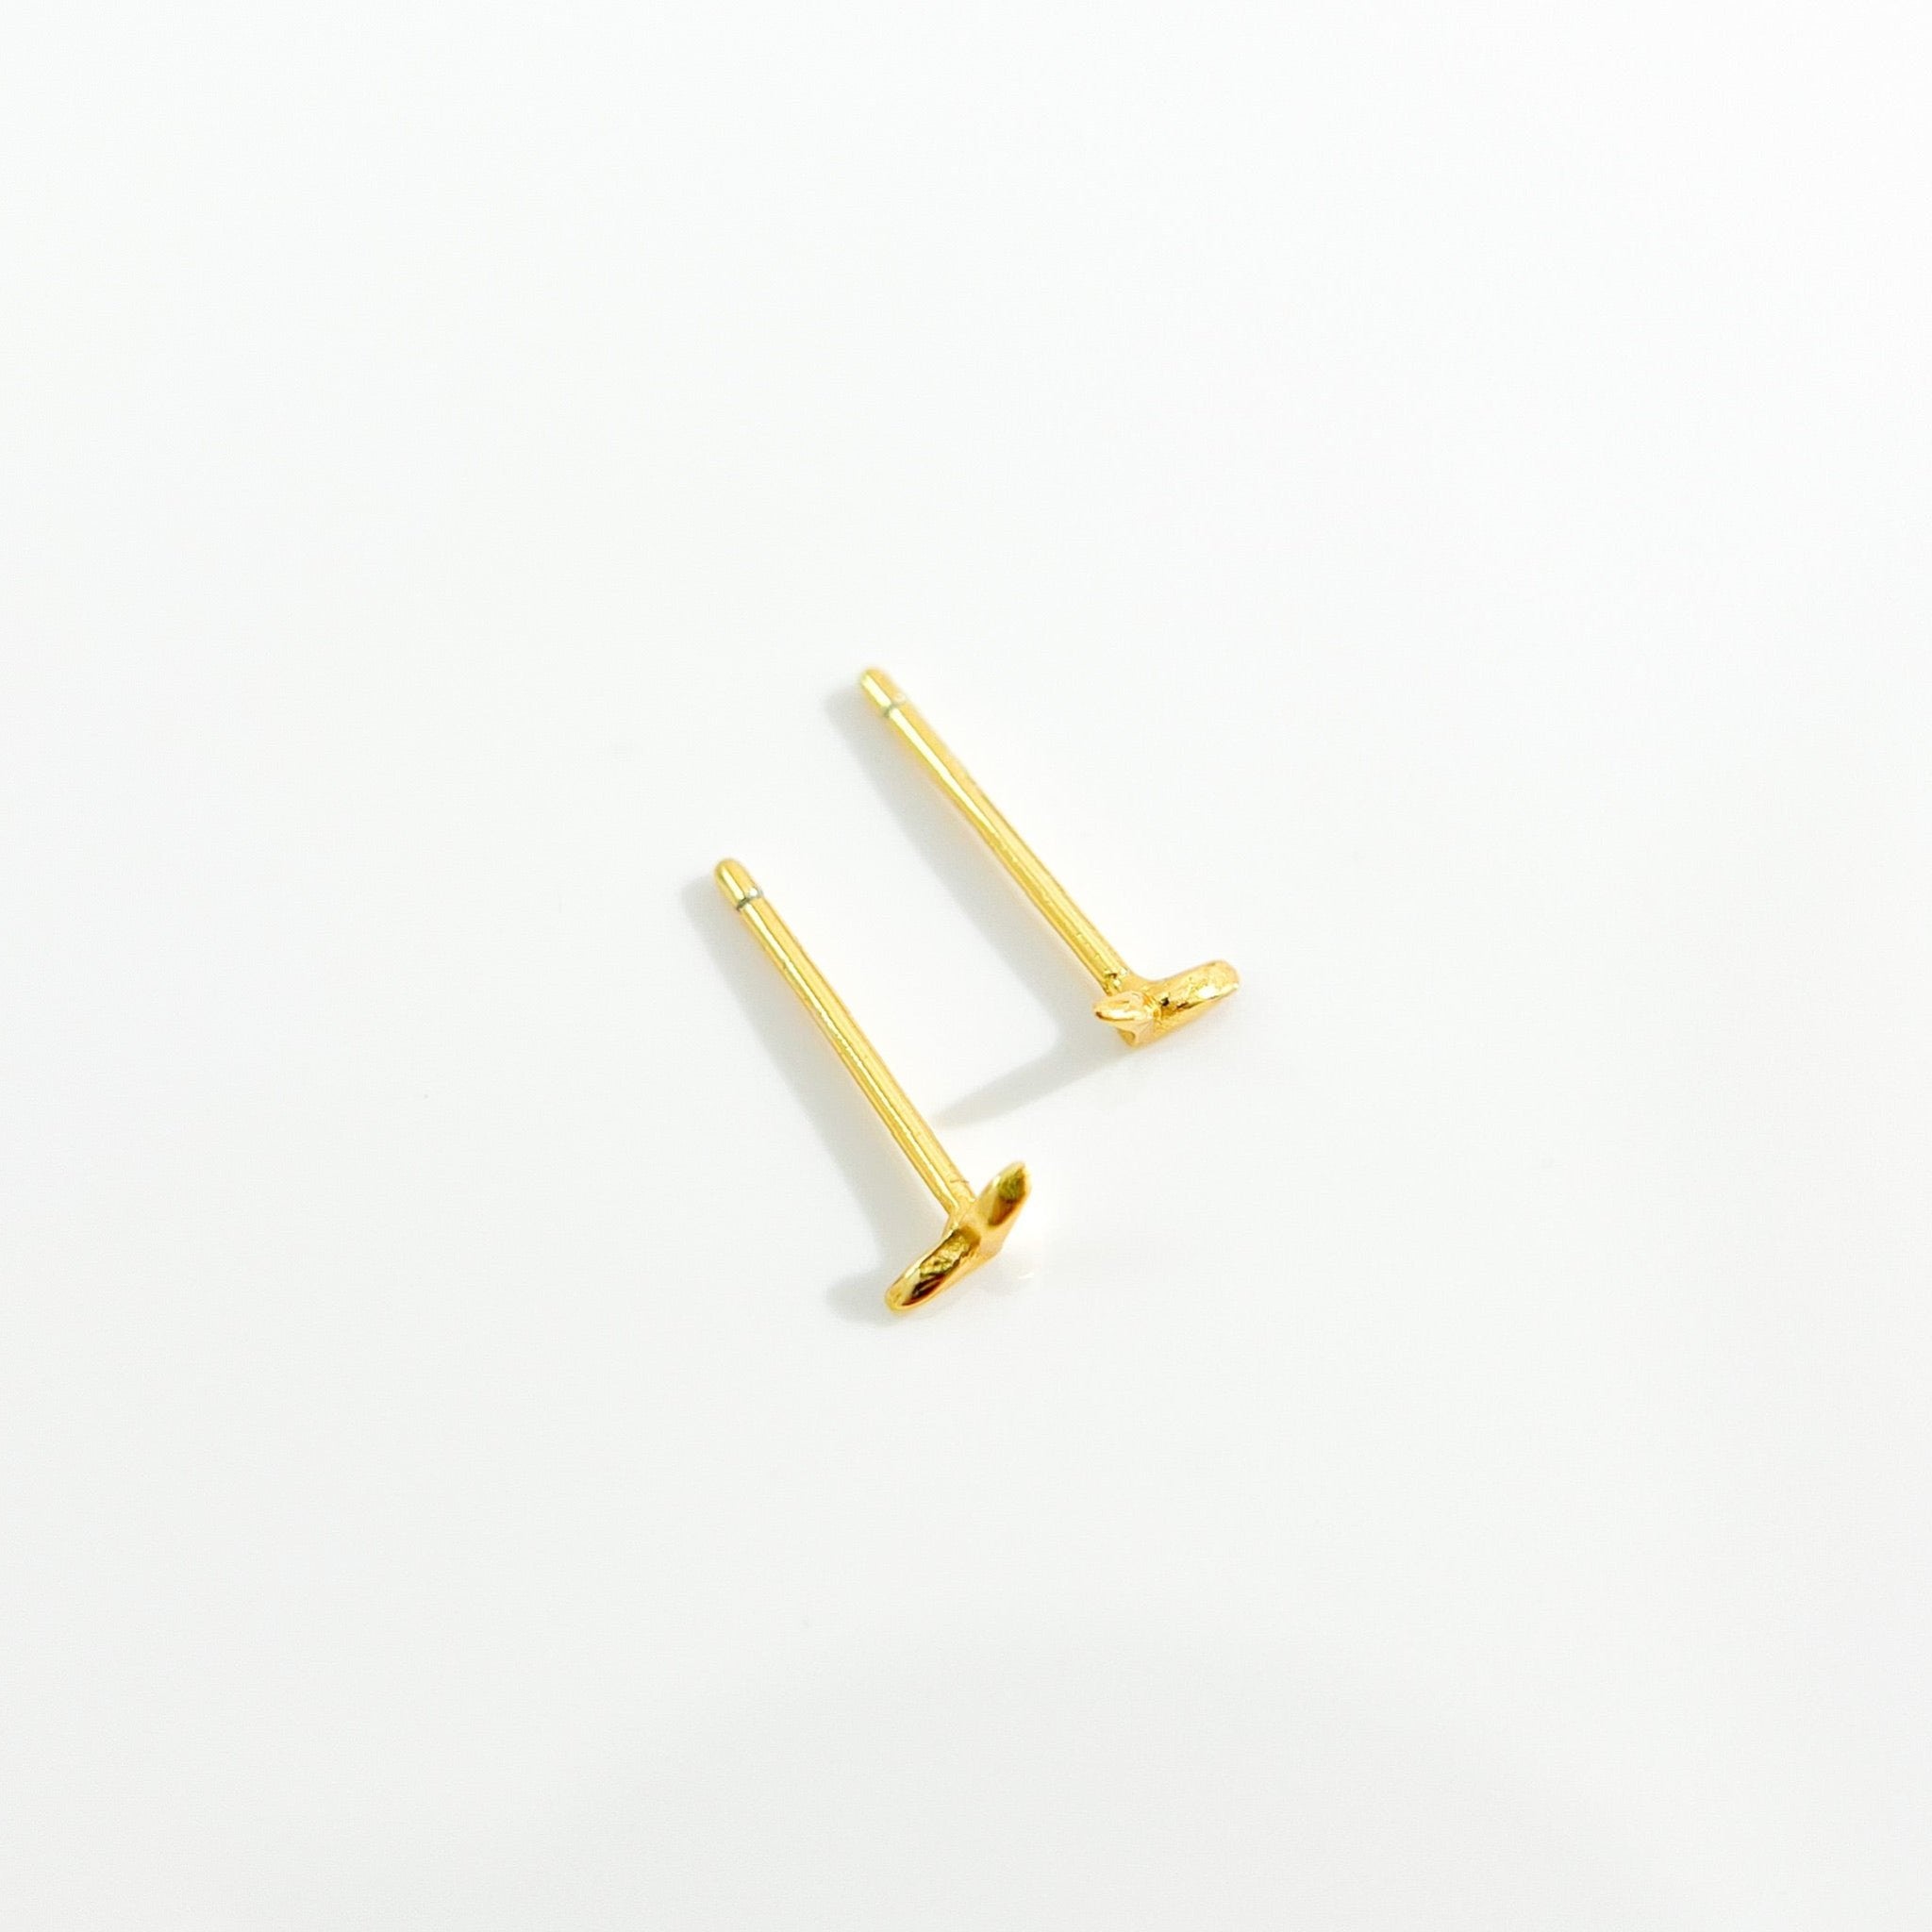 Micro Seagull Studs in Gold - Flaire & Co.